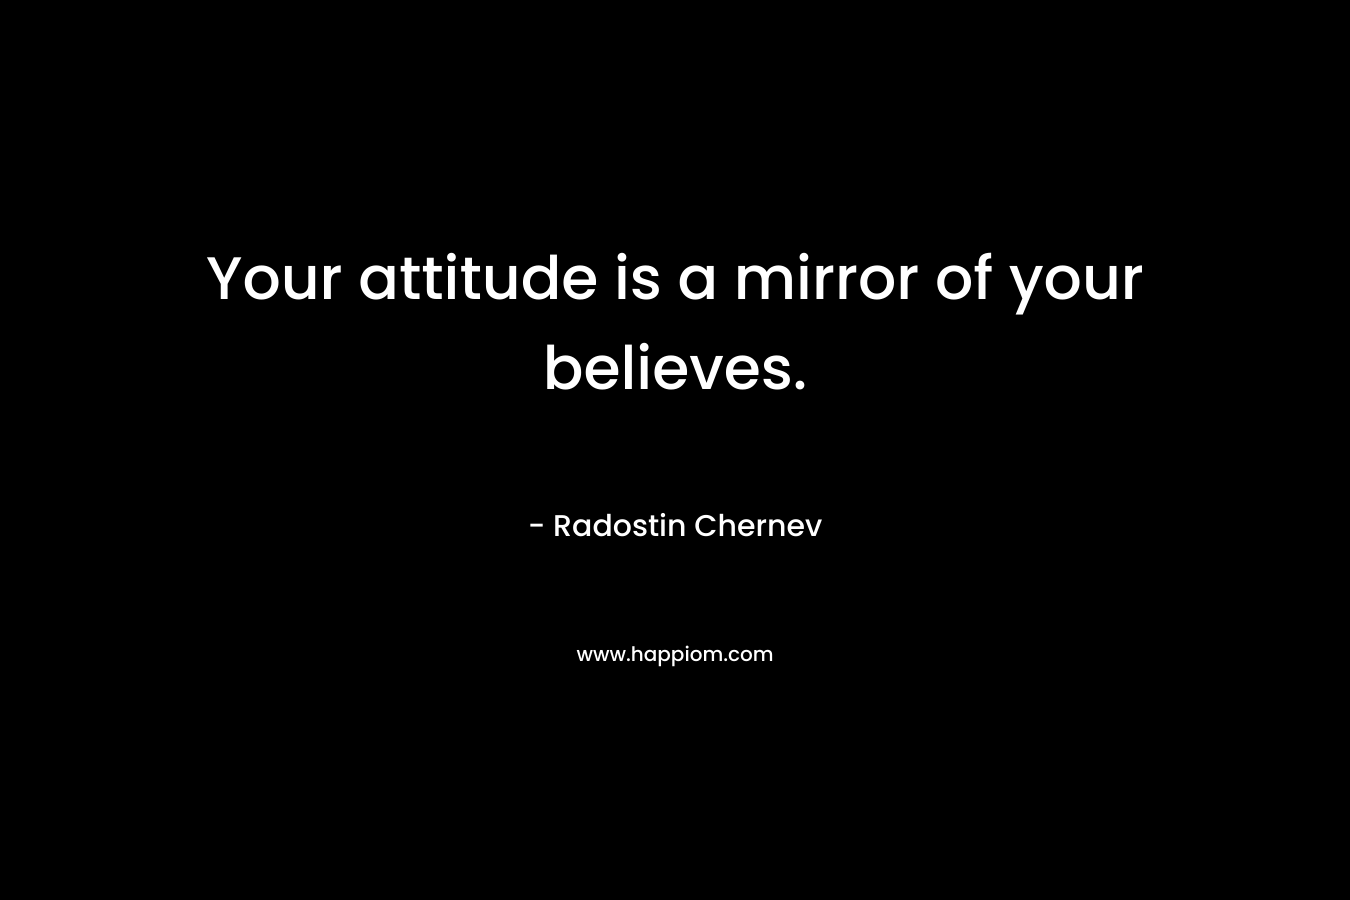 Your attitude is a mirror of your believes.